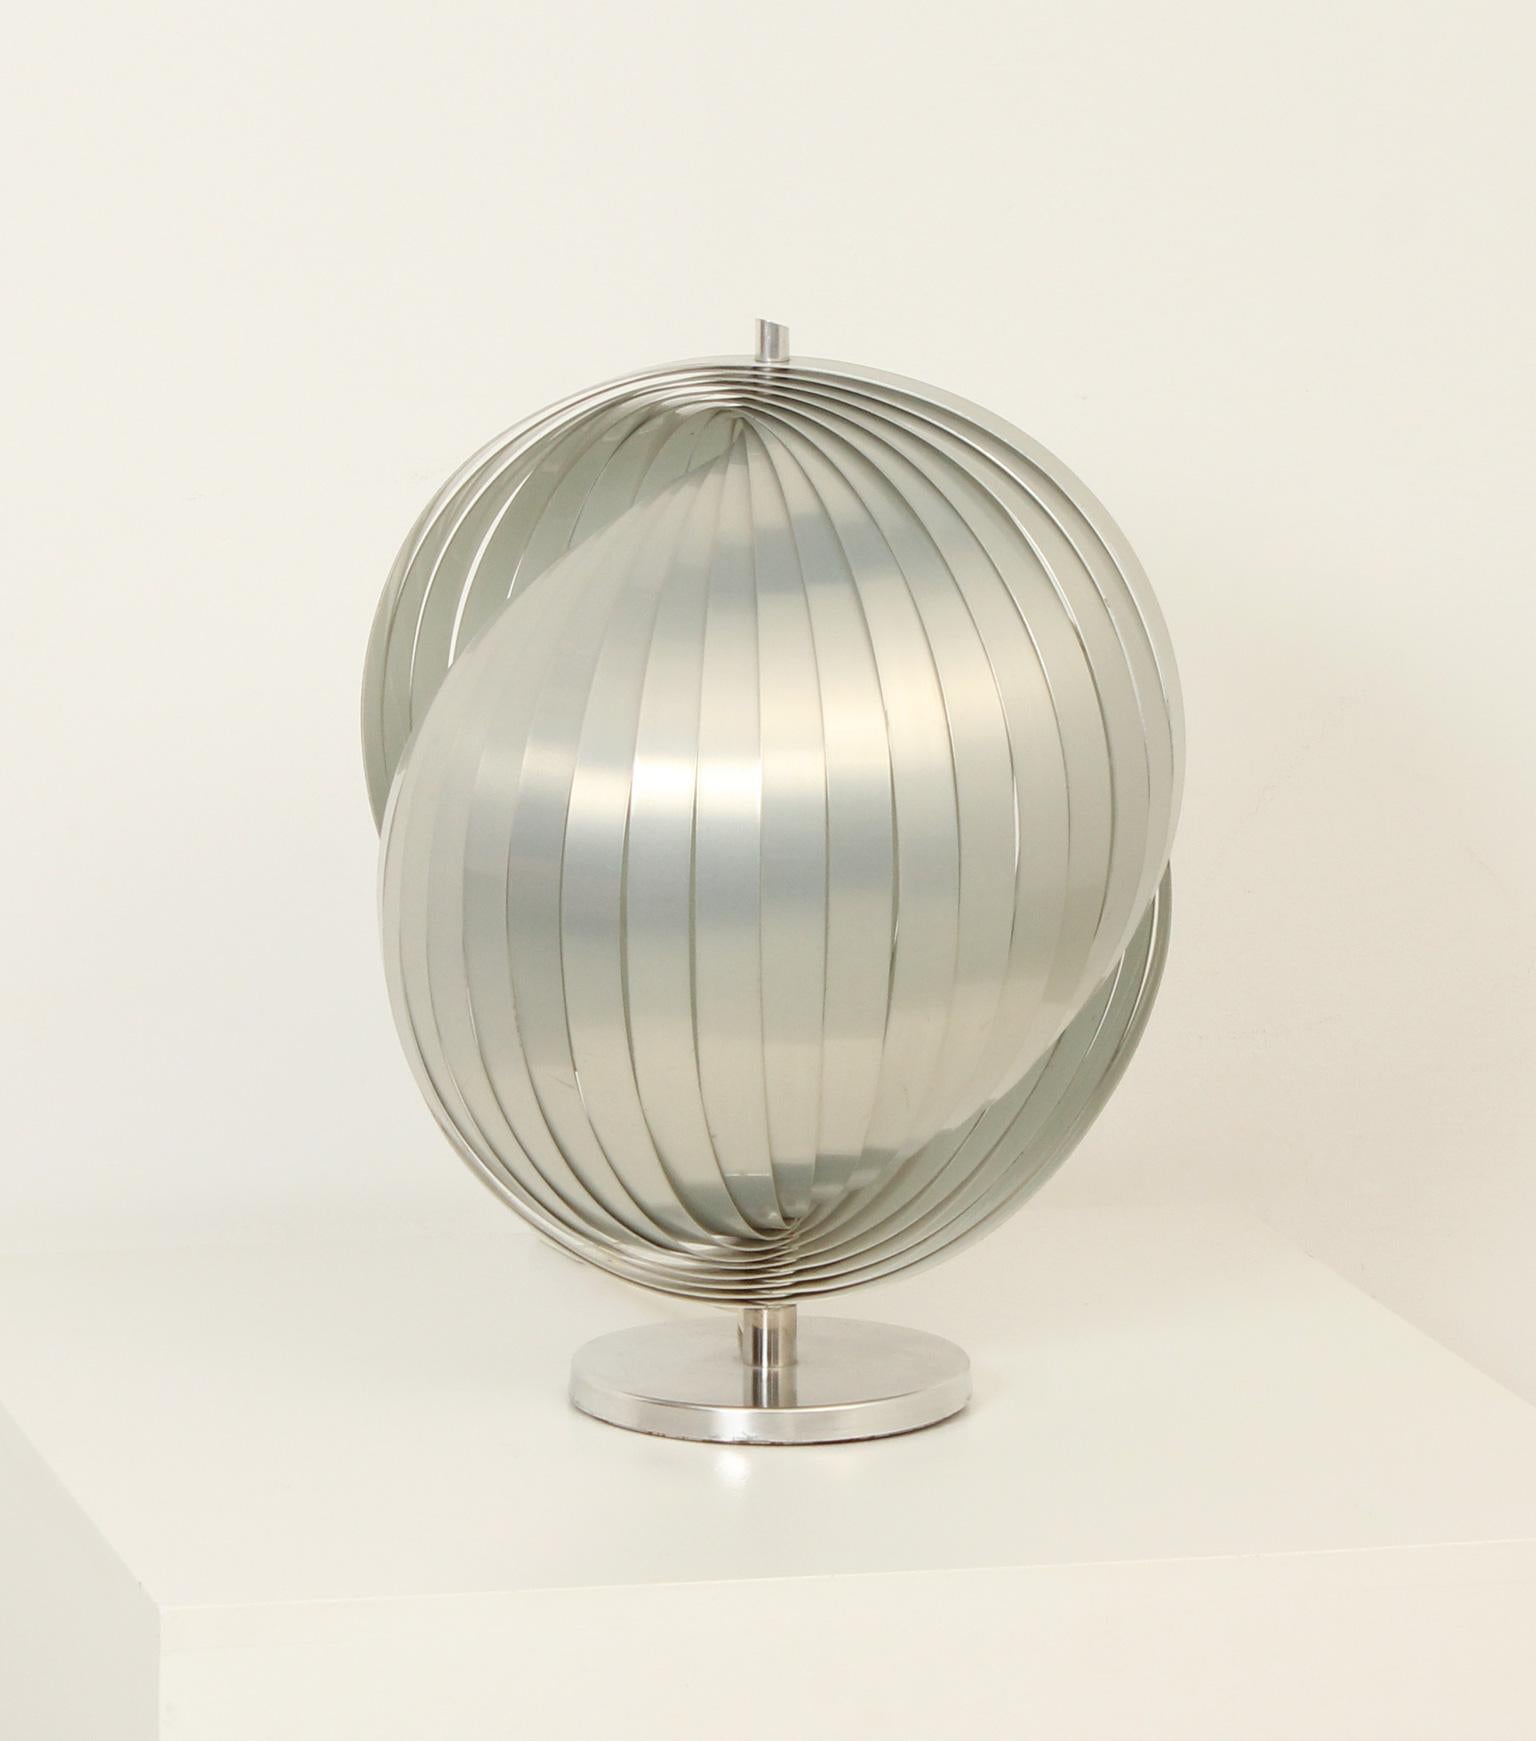 Sculptural table lamp designed by Henri Mathieu in 1972 for Maison Mathieu, France. Brushed and enameled aluminum.